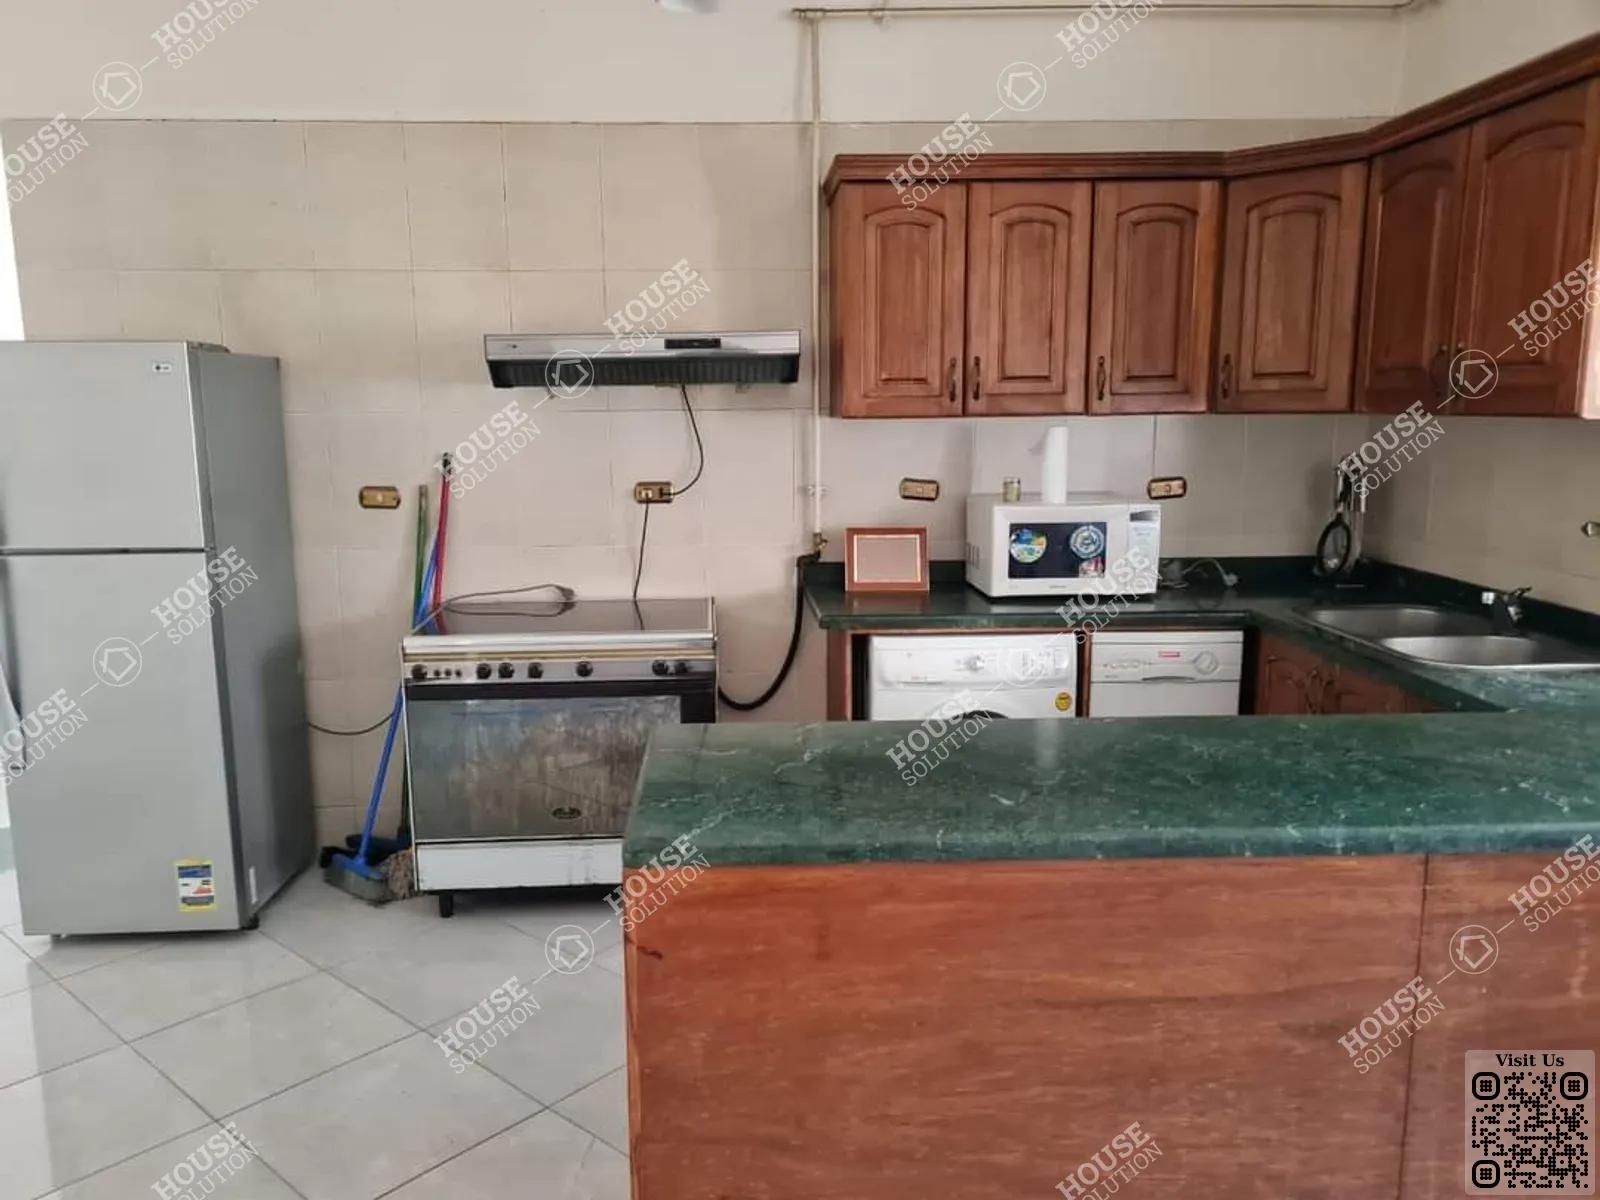 KITCHEN  @ Apartments For Rent In Maadi Maadi Degla Area: 180 m² consists of 2 Bedrooms 3 Bathrooms Modern furnished 5 stars #5654-0